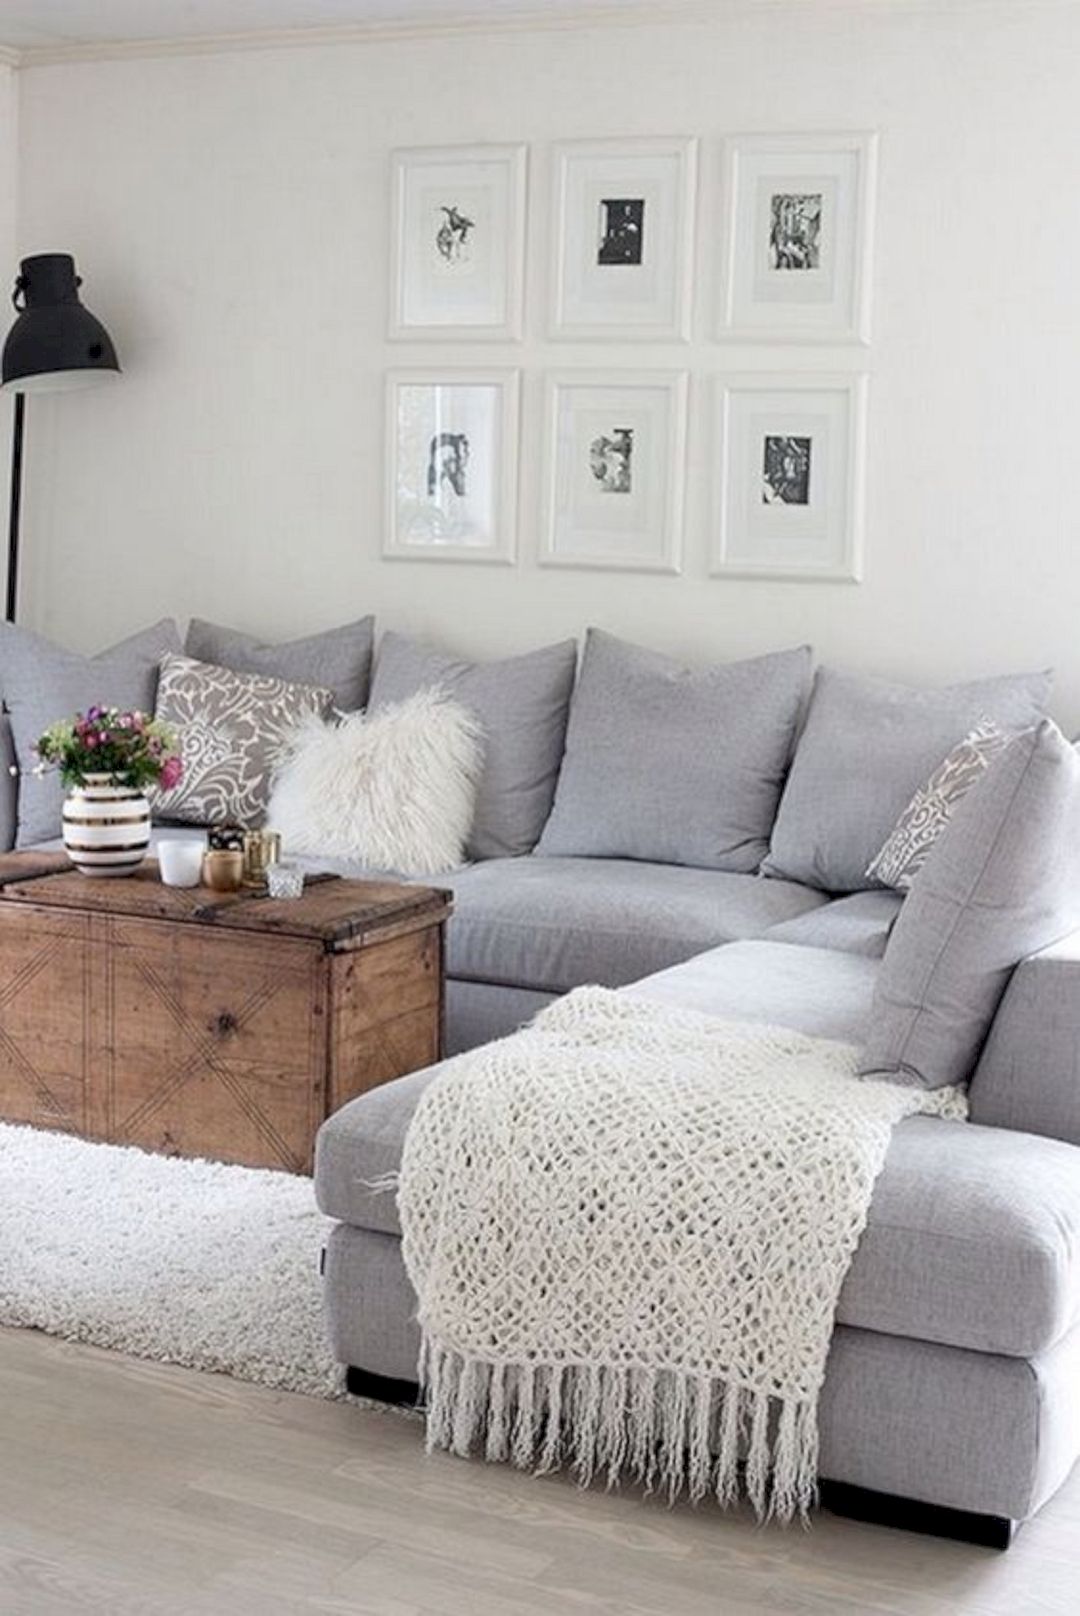 Styling Hacks for Your Small Lounge Room - MY UNIQUE HOME